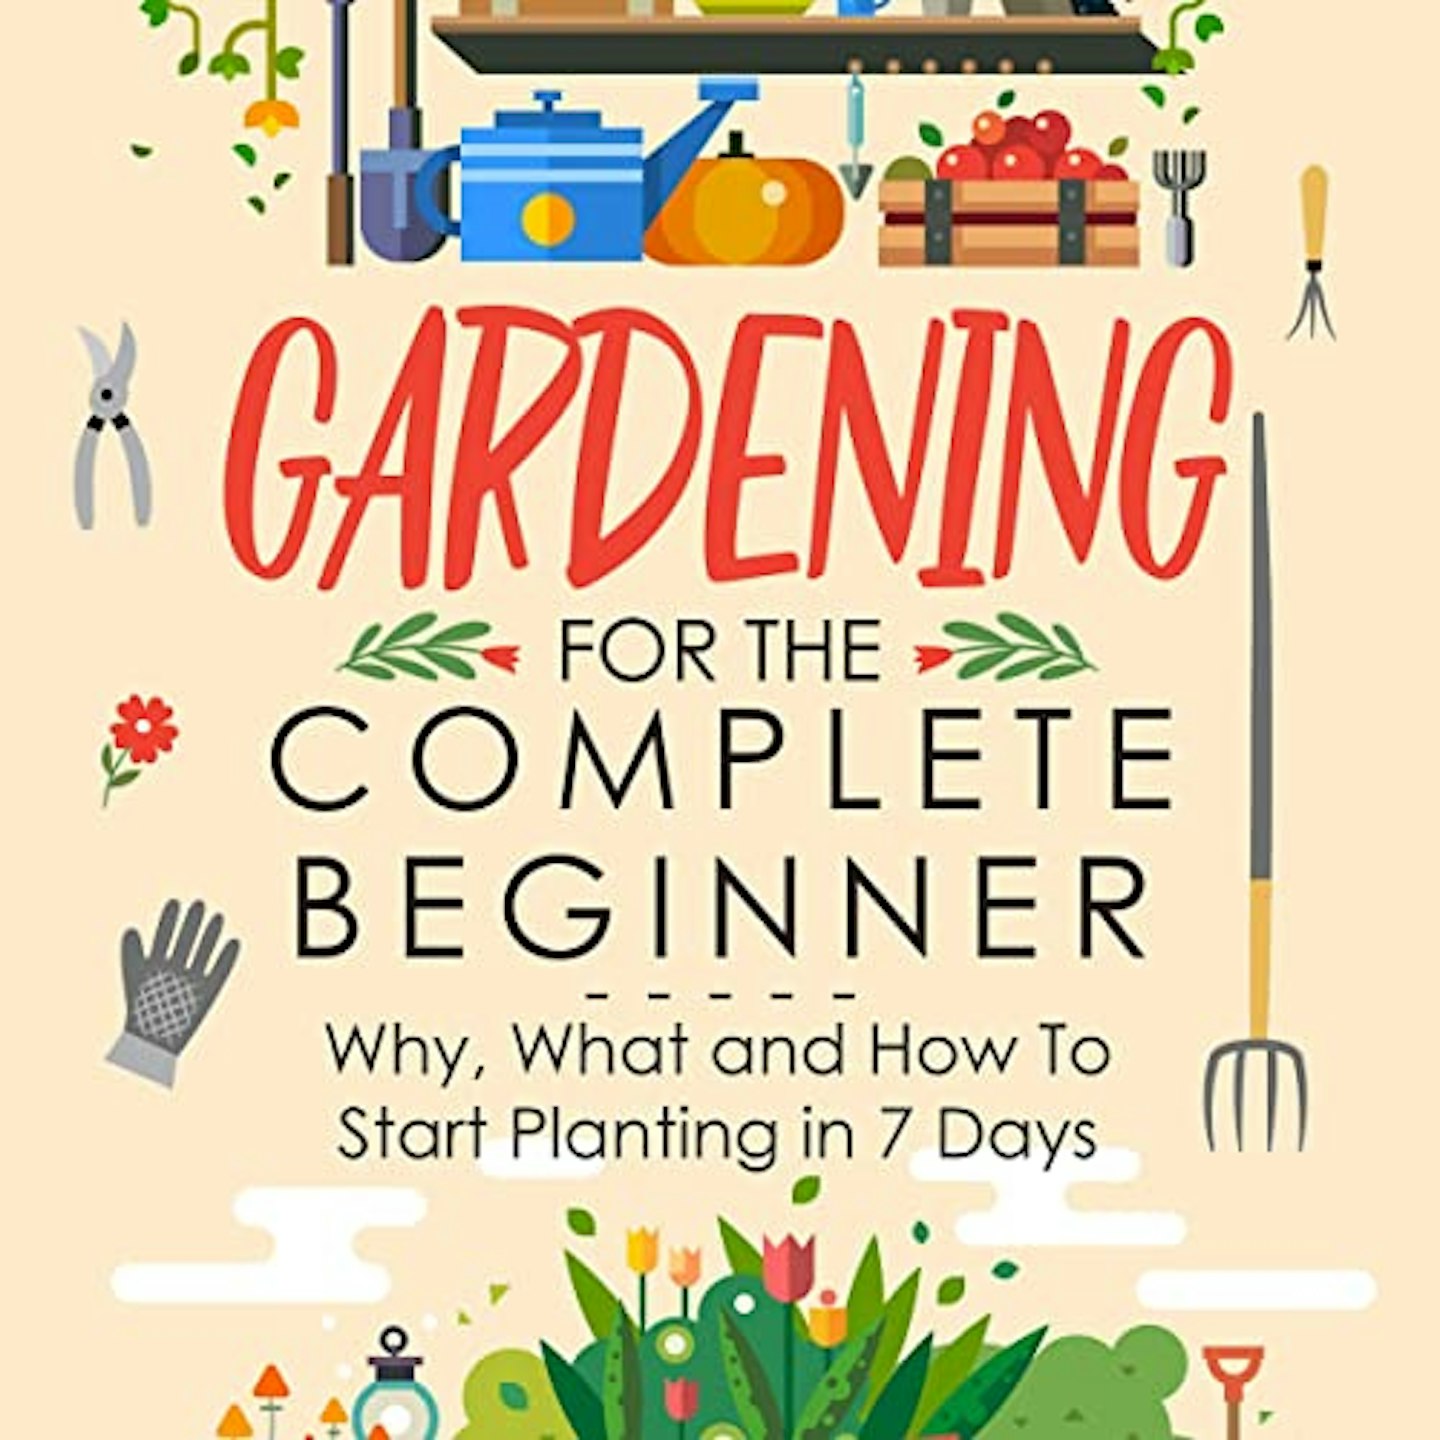 Best Gardening Books for Beginners Gardening for Complete Beginners: Why, What and How to Start Planting in 7 Days